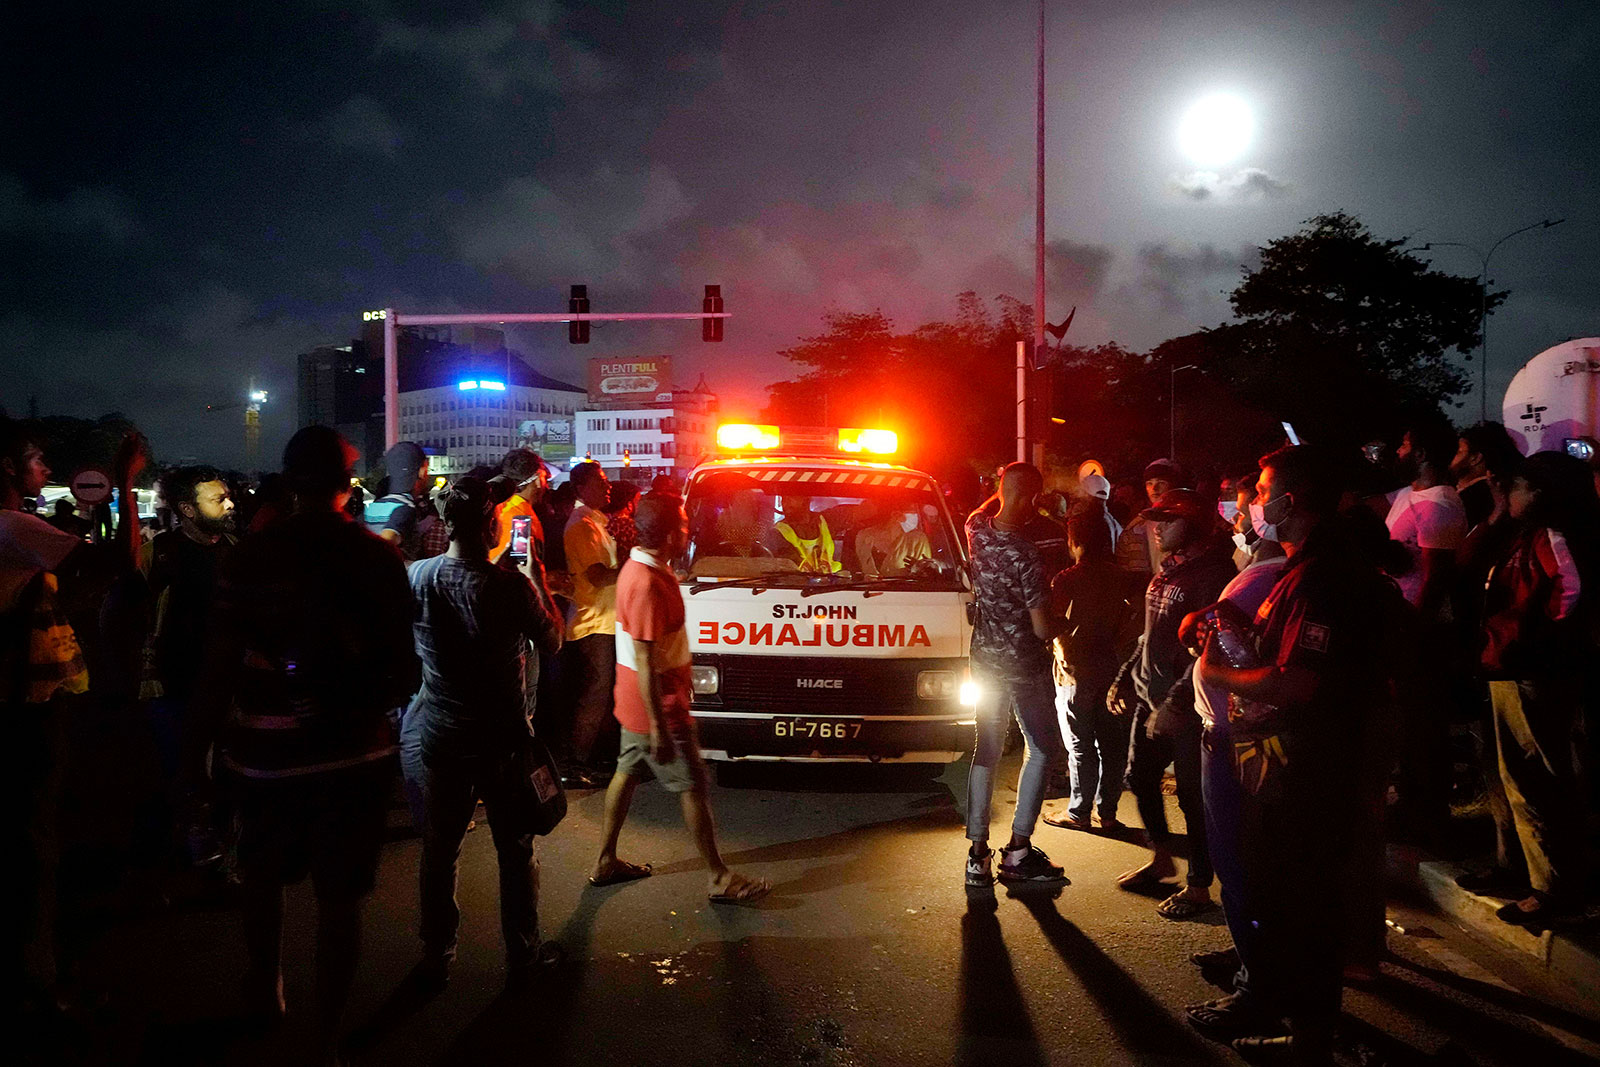 Protesters gather around an ambulance carrying injured after clashes with police near parliament in Colombo, Sri Lanka, on July 13.